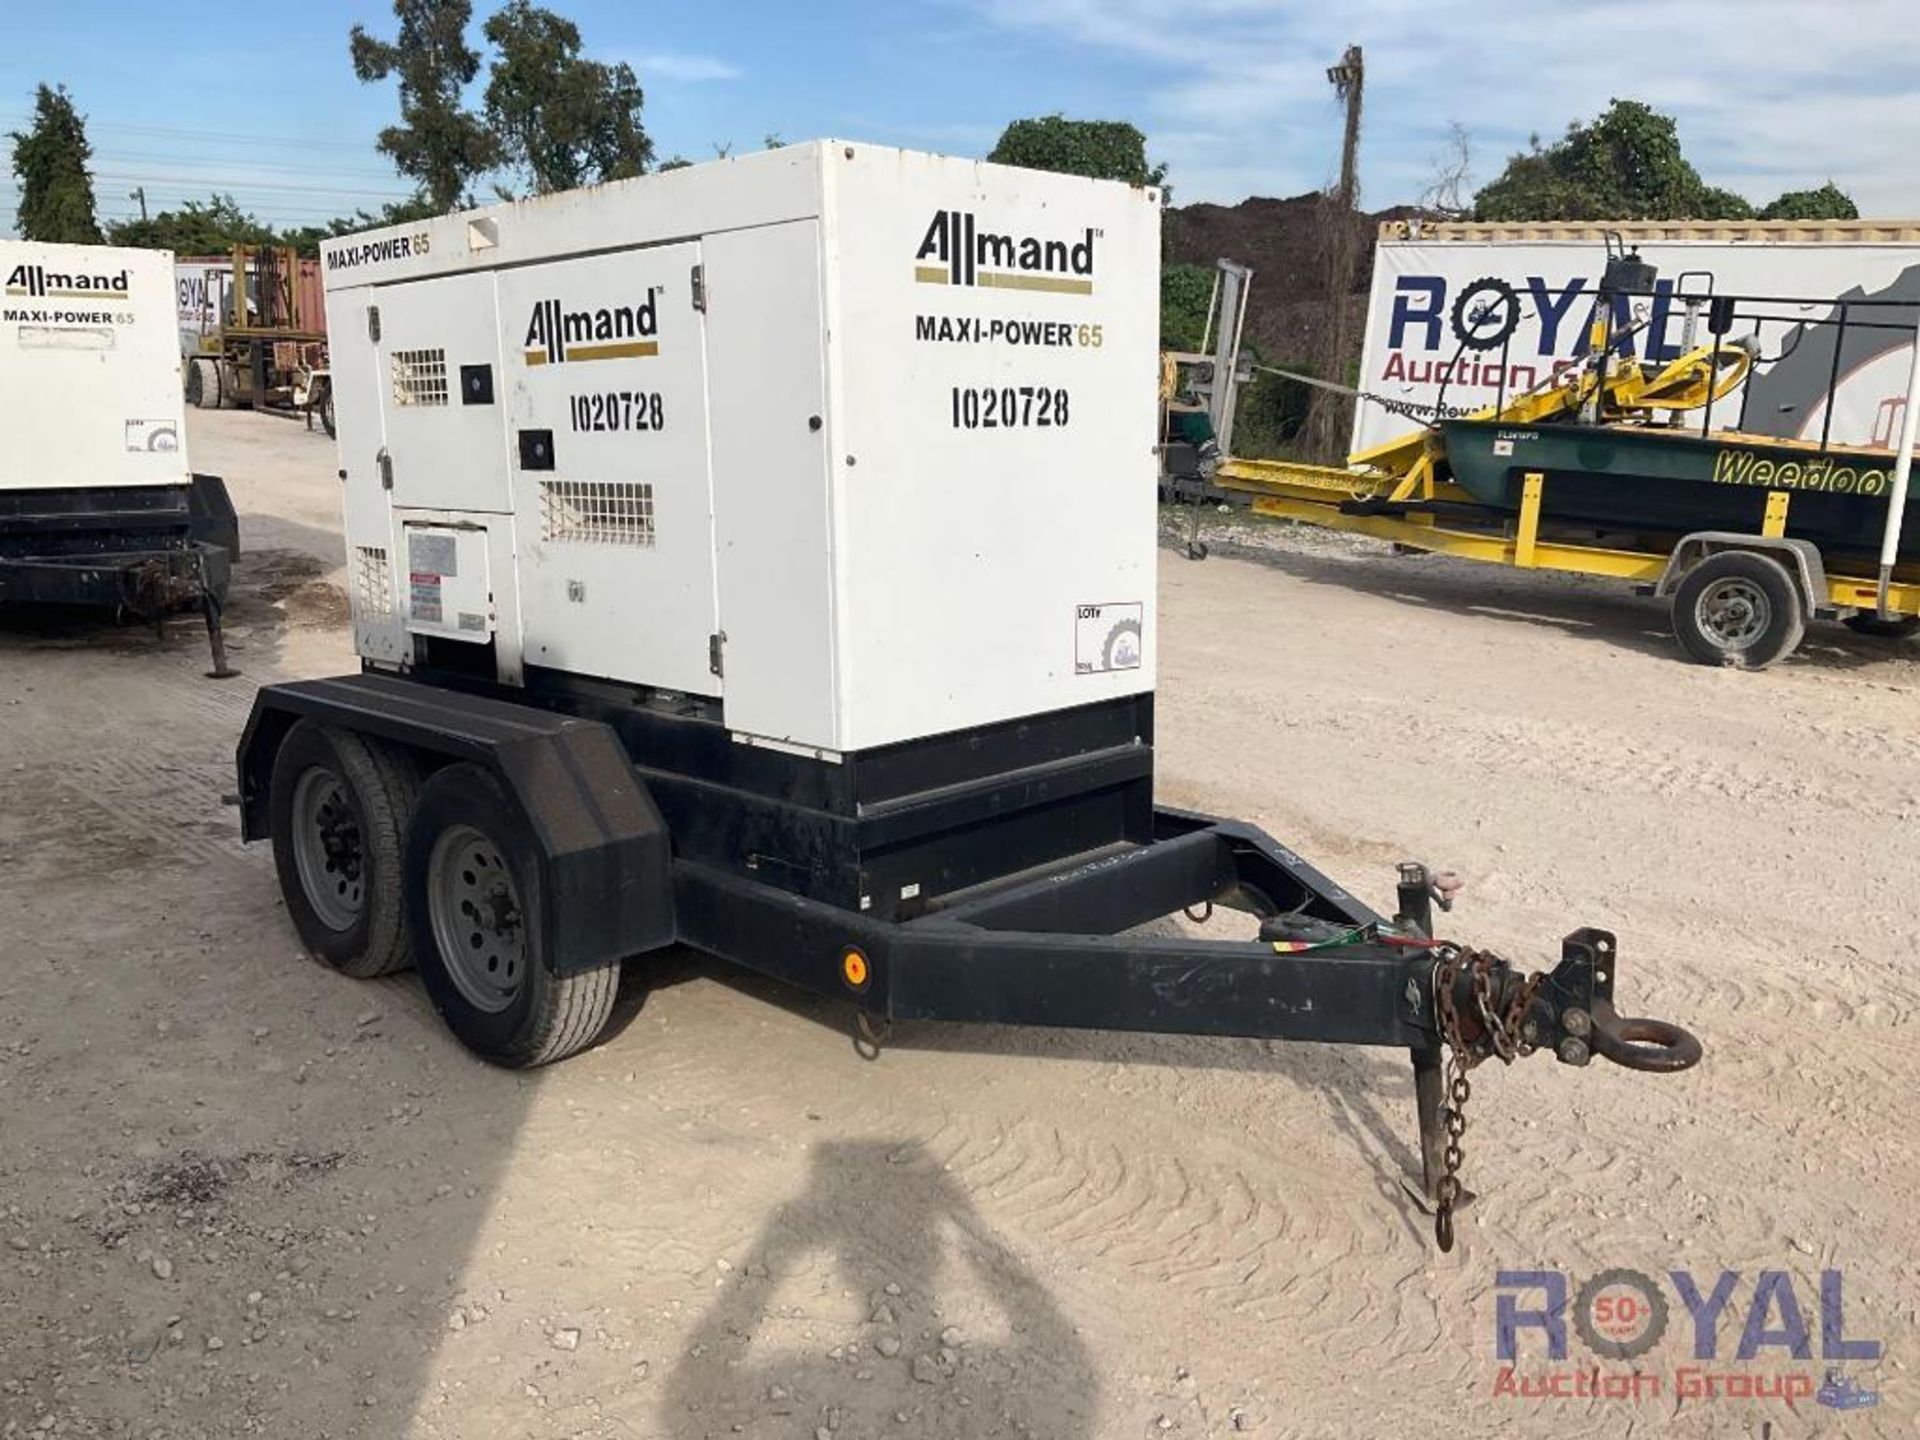 2017 Allmand Maxipower 65-8C1 T/A Towable Generator - Image 2 of 18